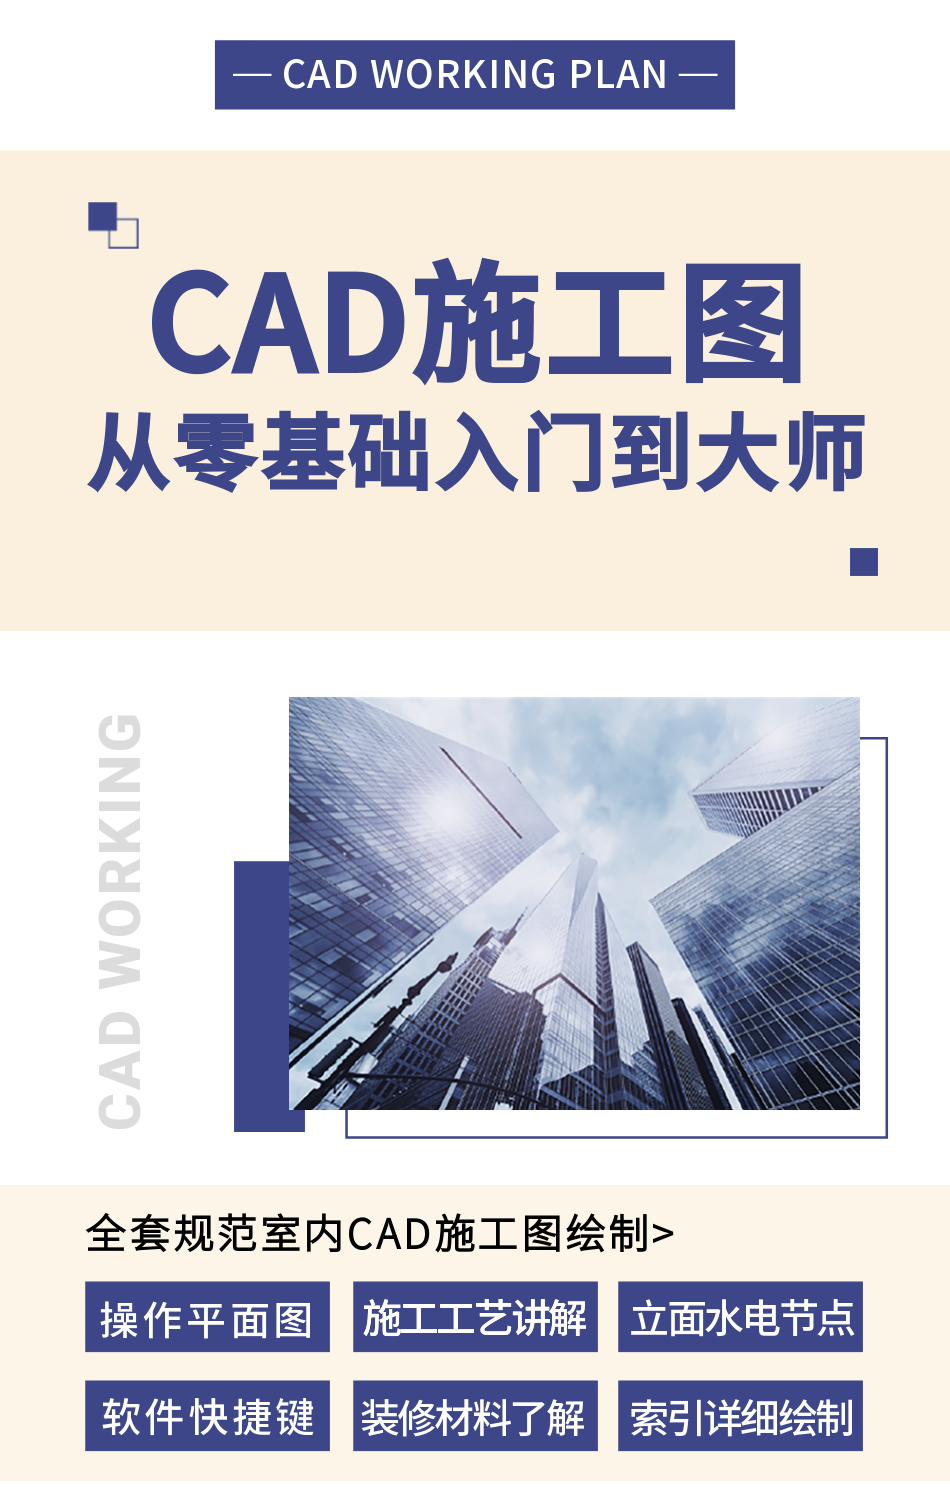 CAD施工详情页_01.png